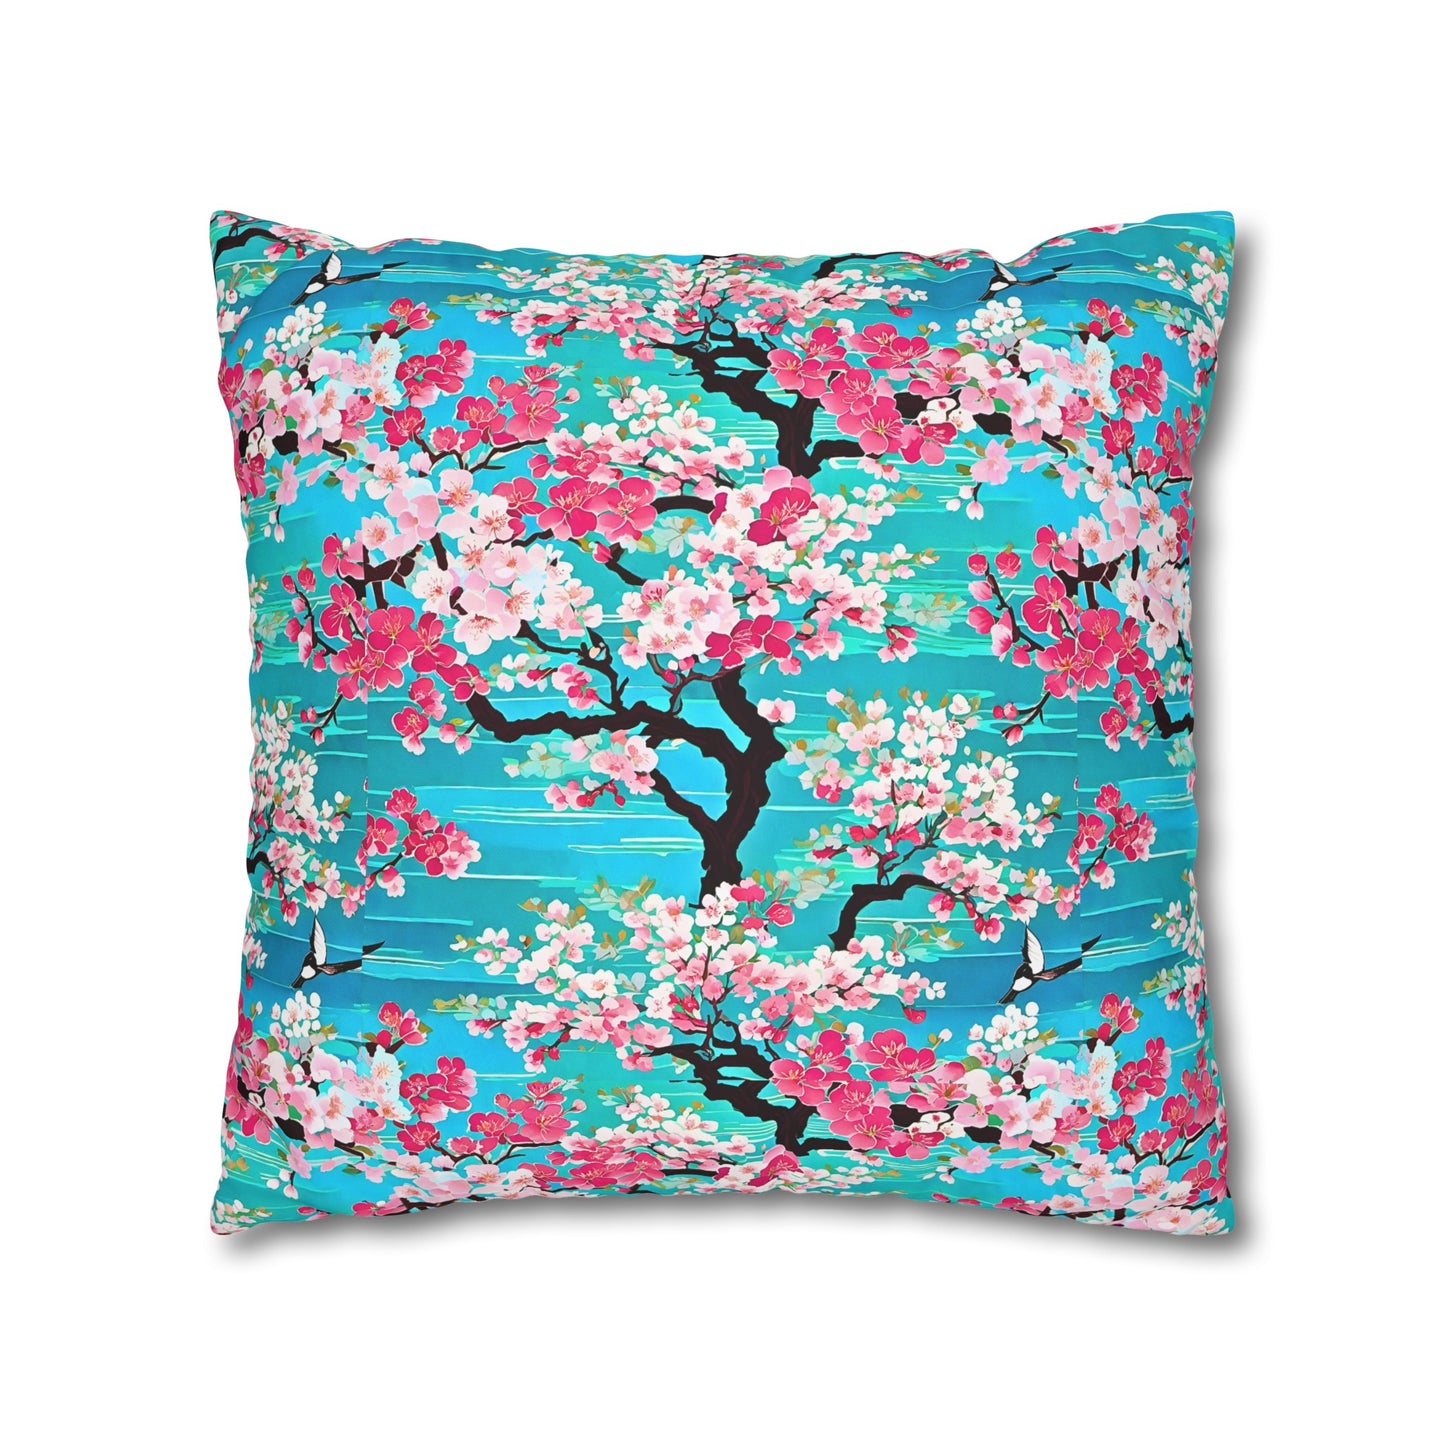 Turquoise Cherry Blossoms Japanese Kyoto Floral Decorative Spun Polyester Pillow Cover